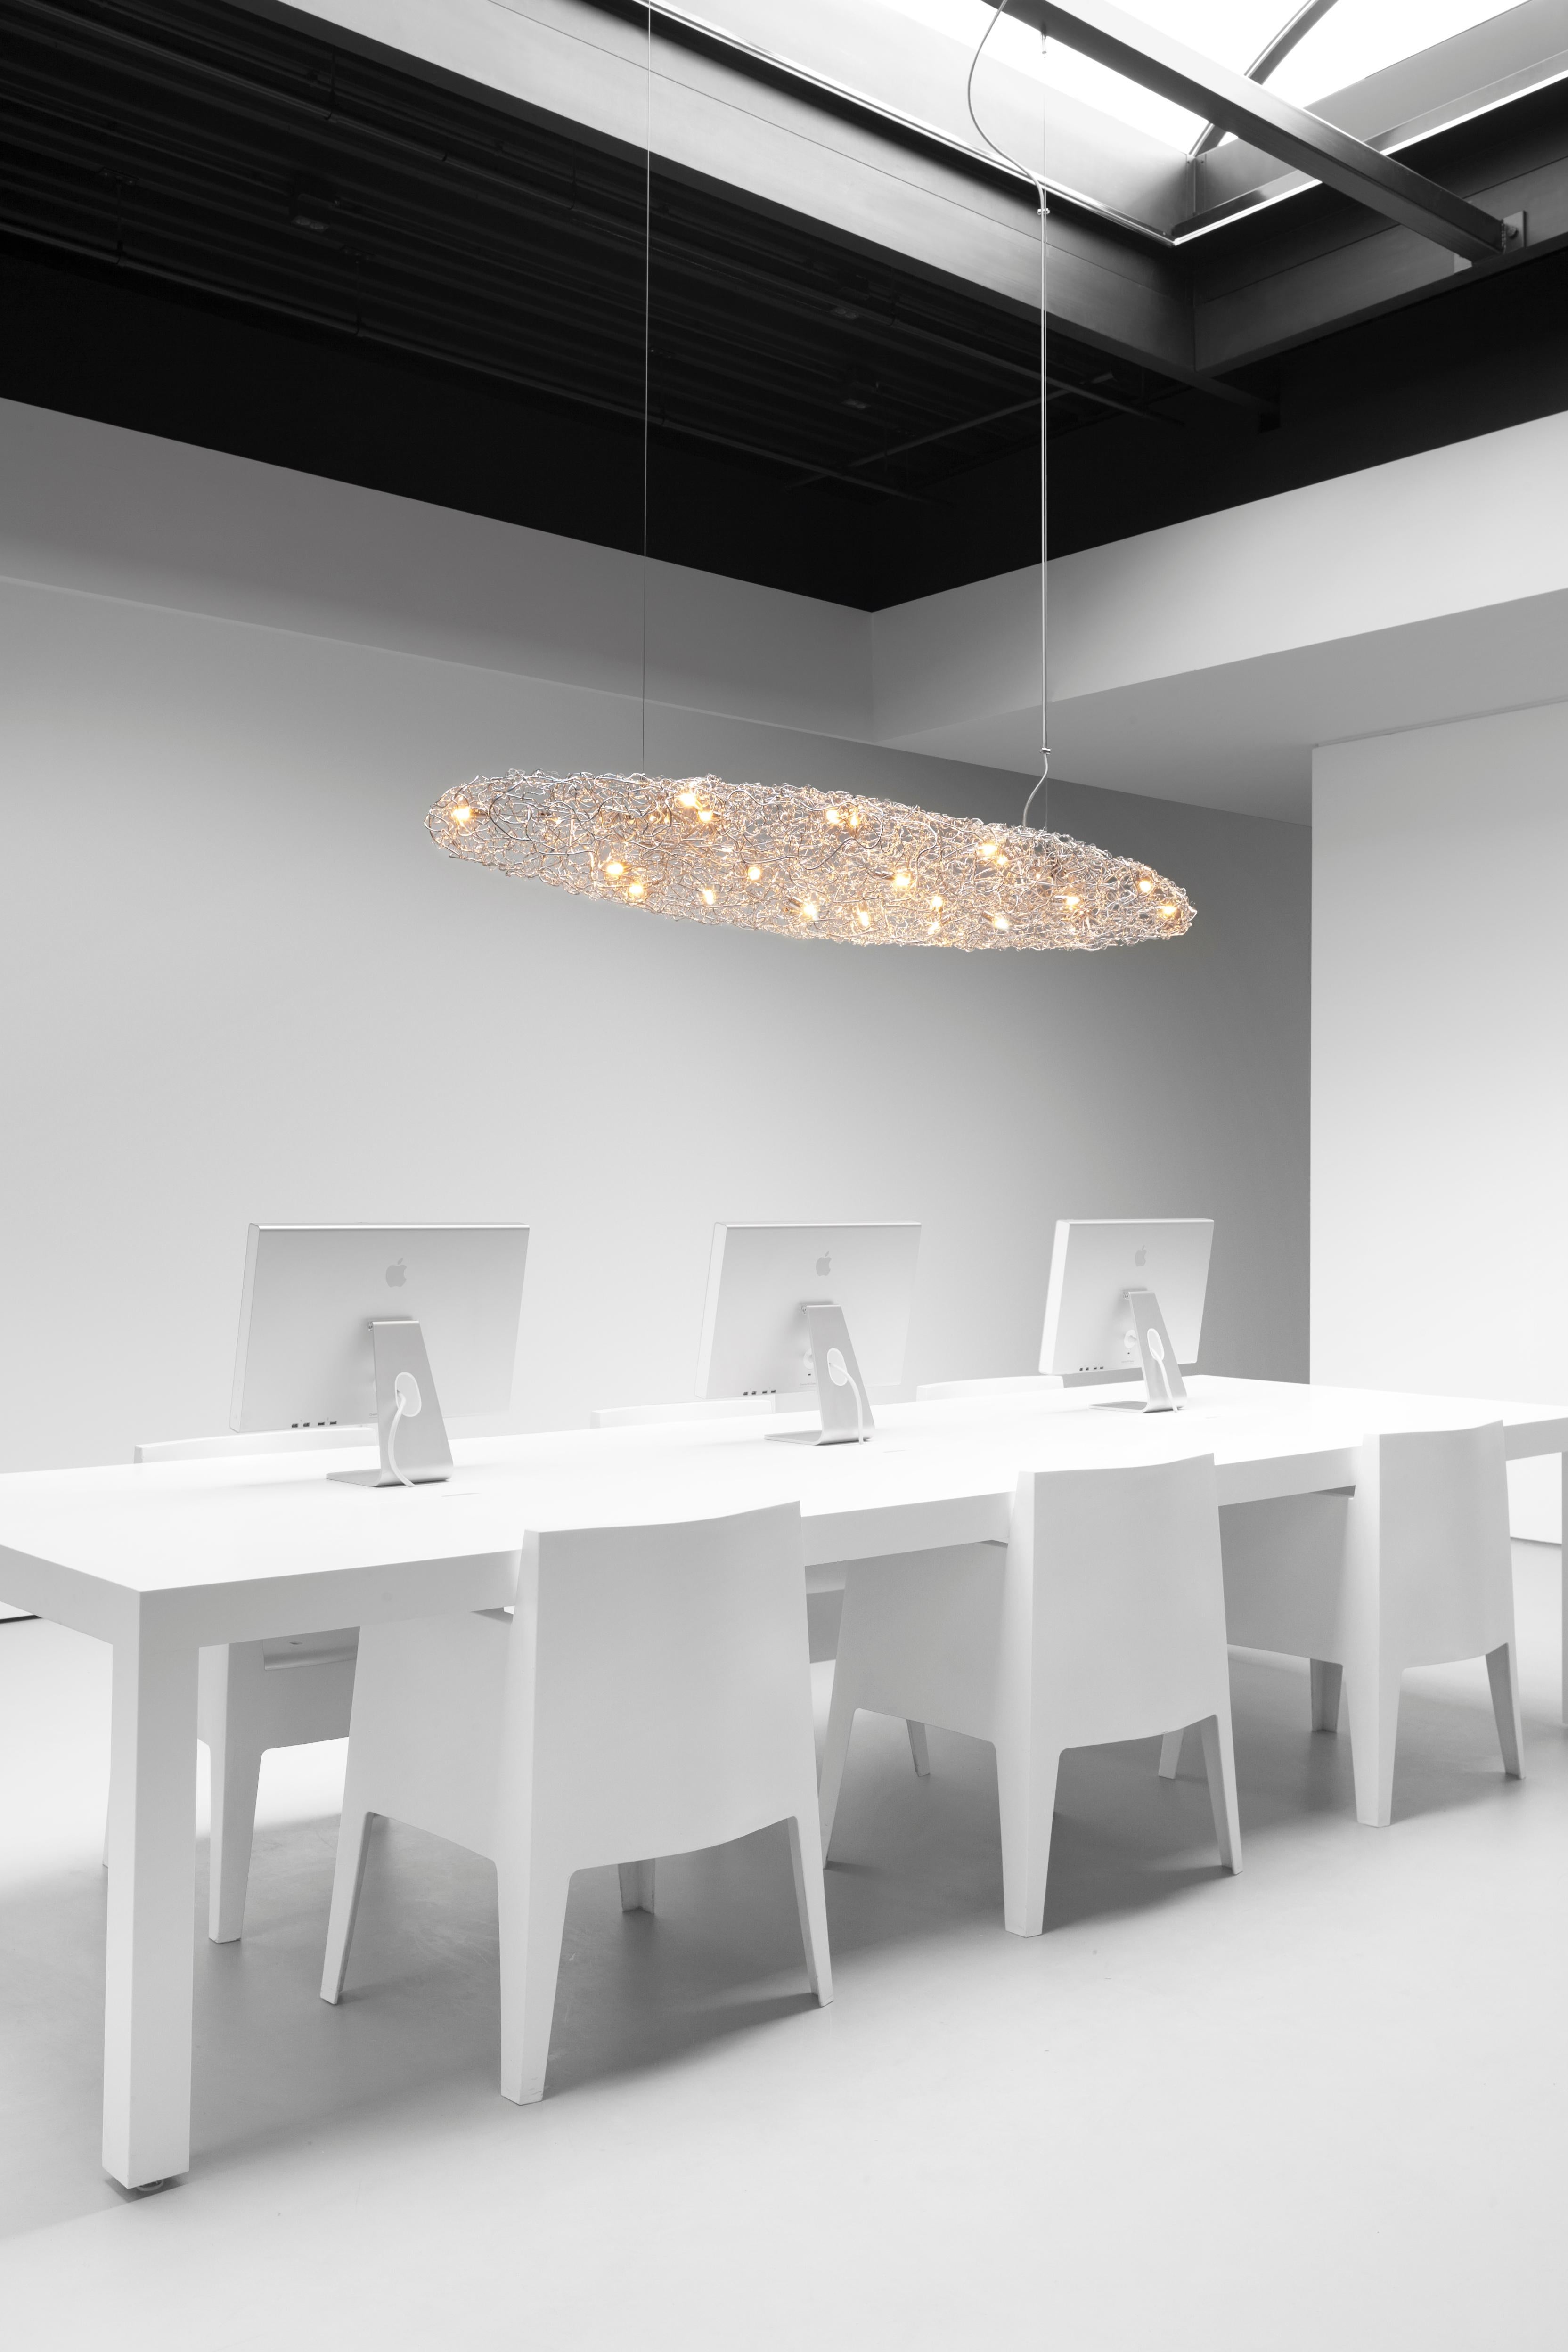 The Crystal Waters Cigar is a modern pendant designed by William Brand, founder of Brand van Egmond. The Crystal Waters collection, crafted by hand in a nickel finish, is available in various hanging lights, a ceiling light and a wall light. Custom